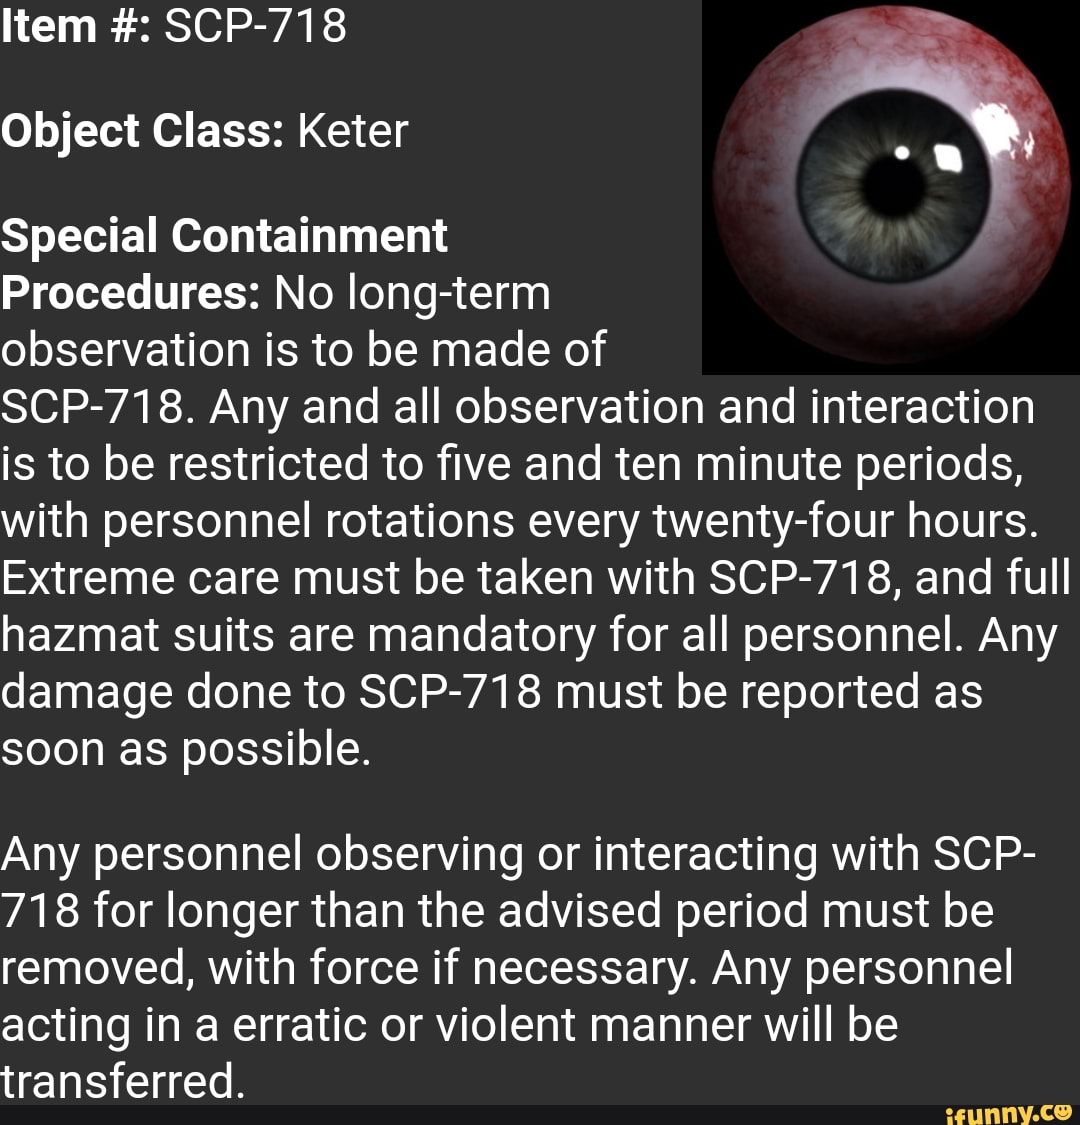 Scp Codename: MaIO ver1.0.0 Object class euclid Special Containment  Procedures: All mobile devices that have SCP-1471 installed are to be  confiscated and analyz…